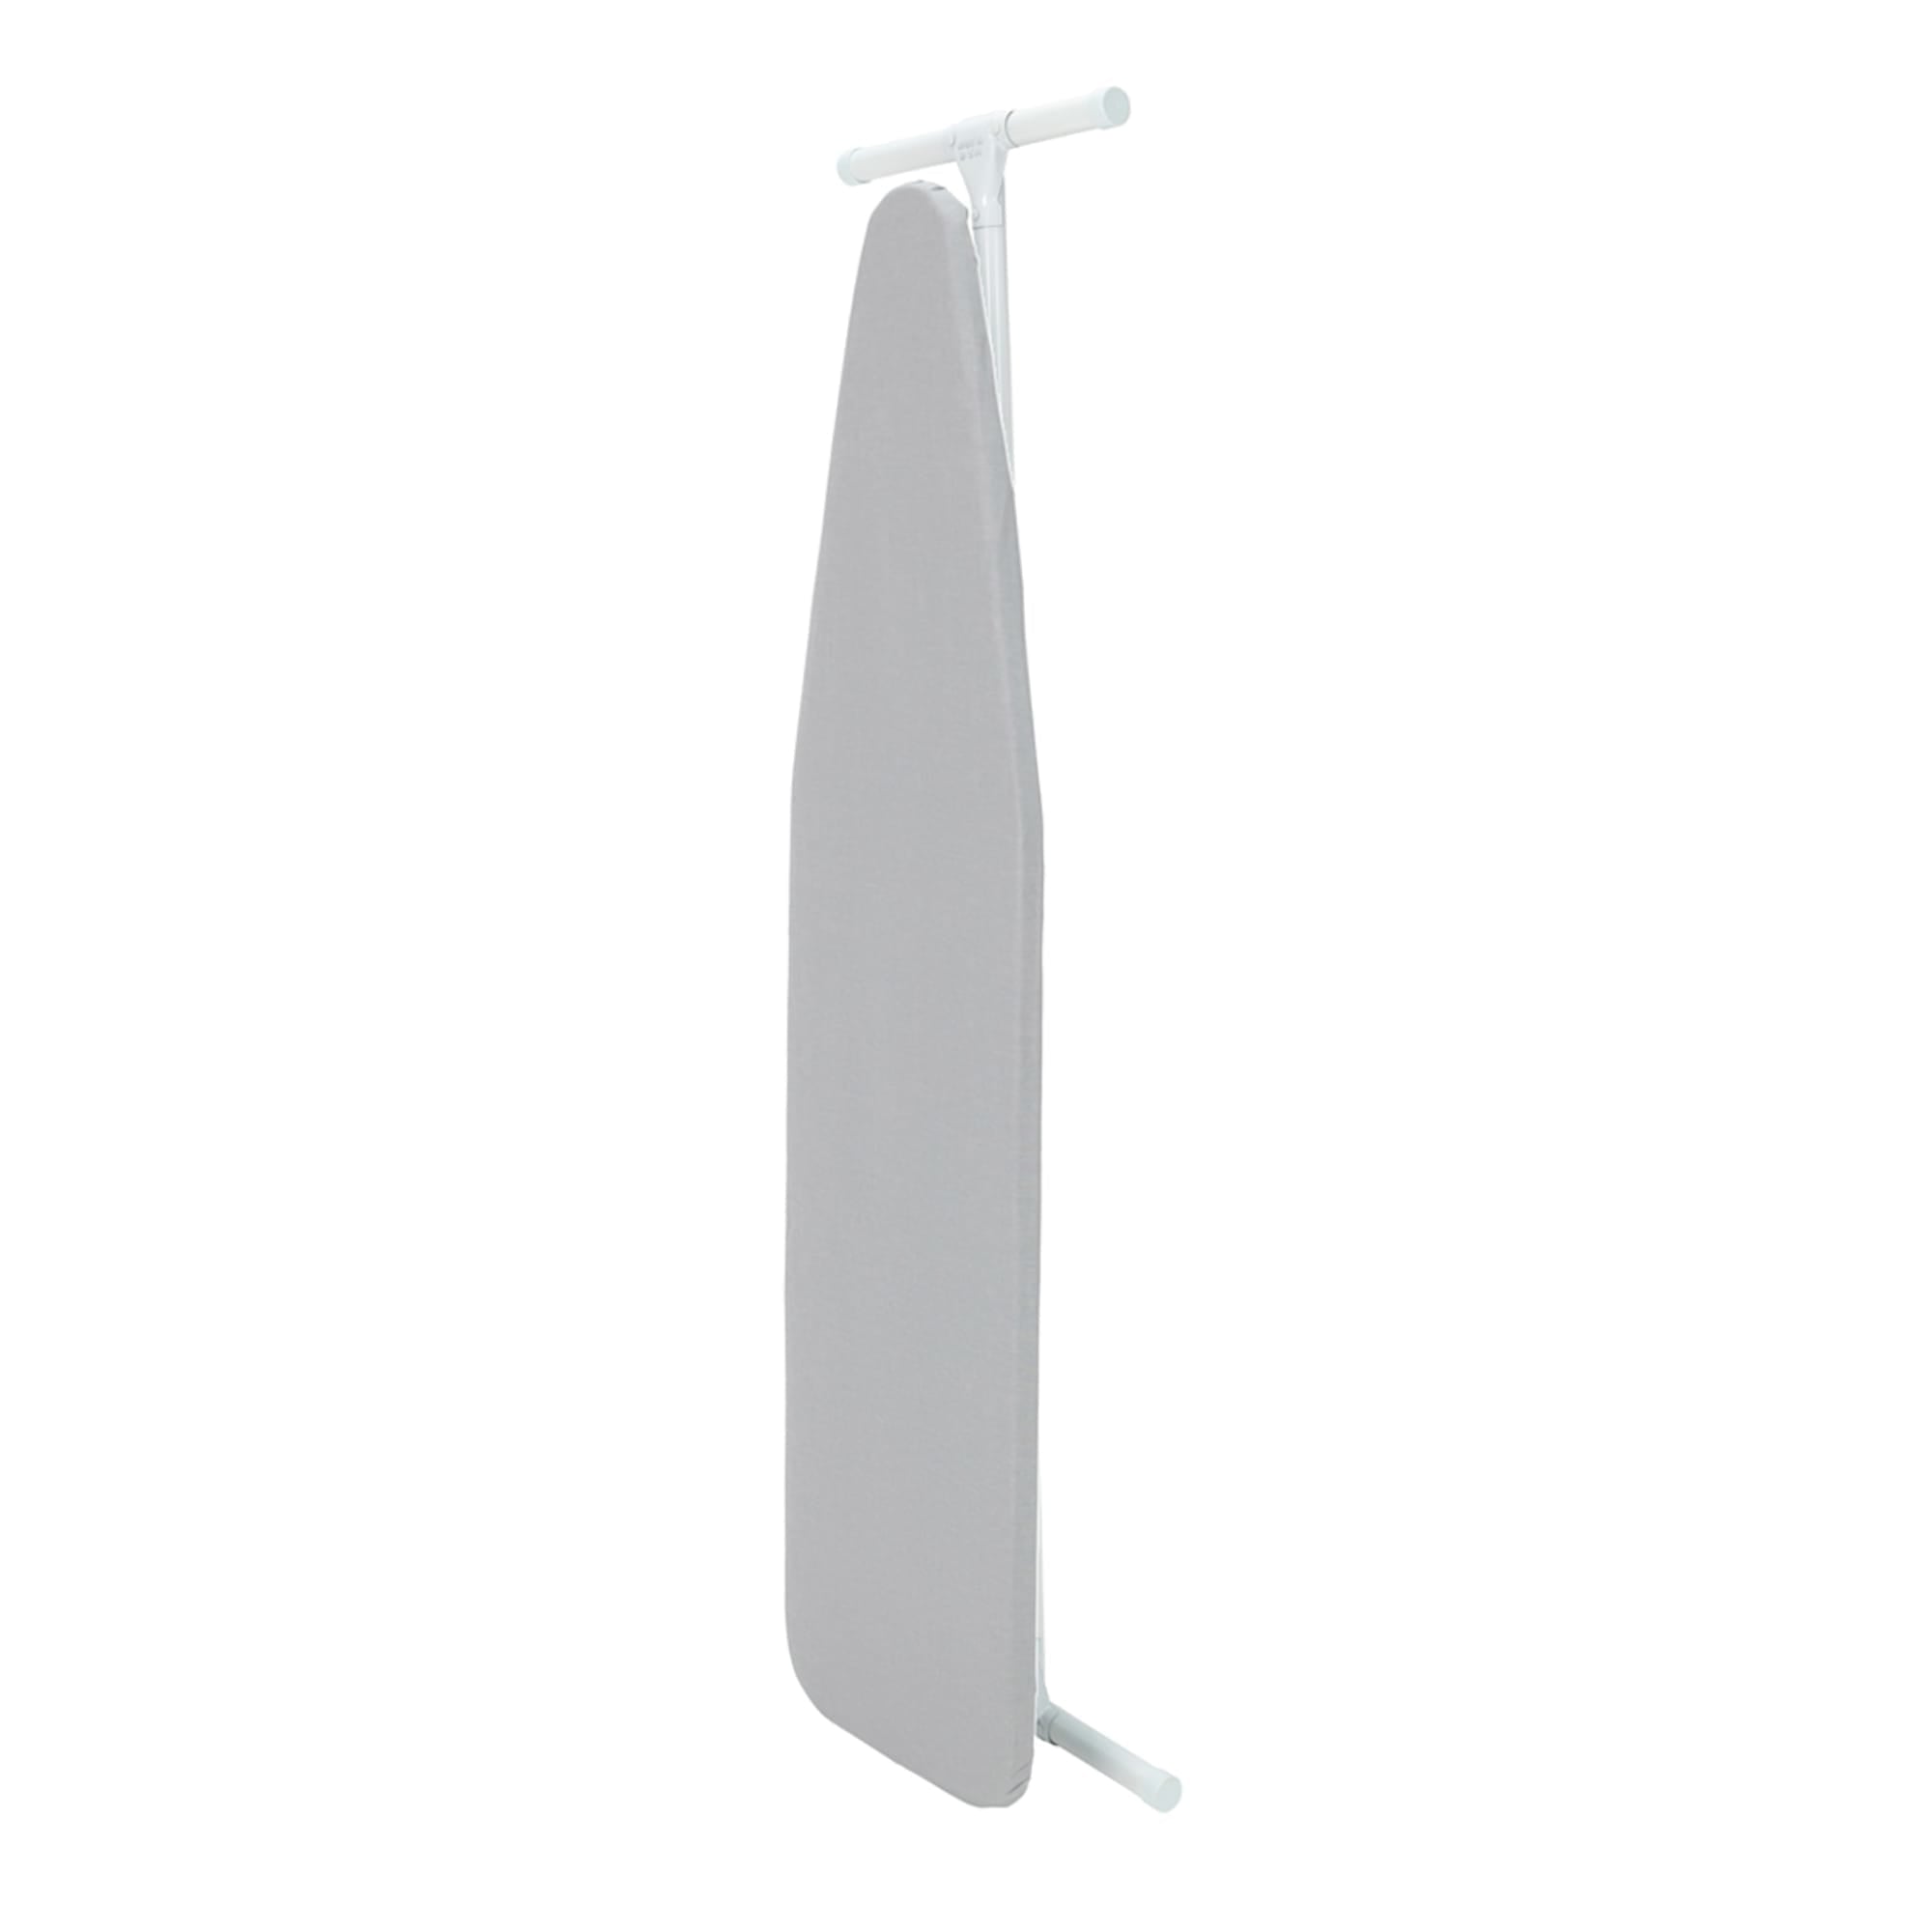 Seymour Home Products Adjustable Height, Freestanding T-Leg Ironing Board, Space Gray $25.00 EACH, CASE PACK OF 1